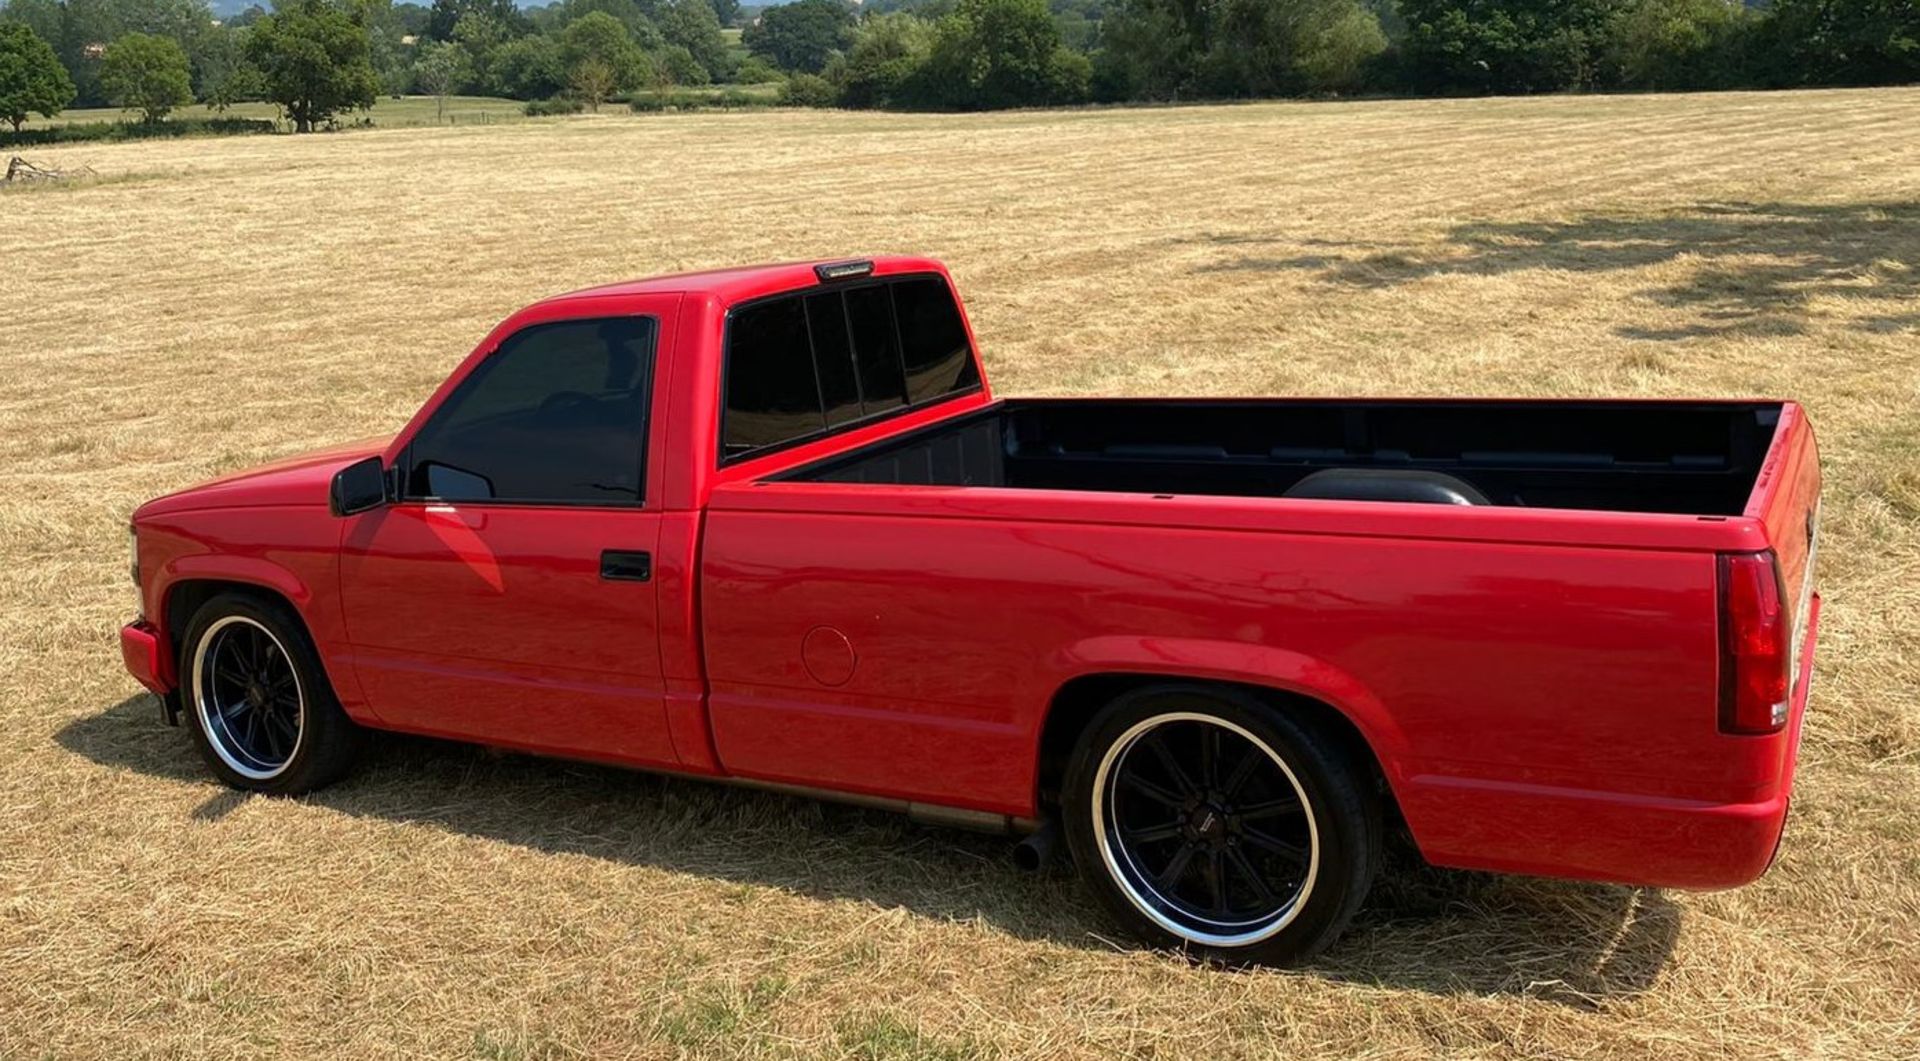 Super Red 1988 Chevrolet C1500 / OBS / GMT-400 - Single cab long bed (8ft) - Image 4 of 15